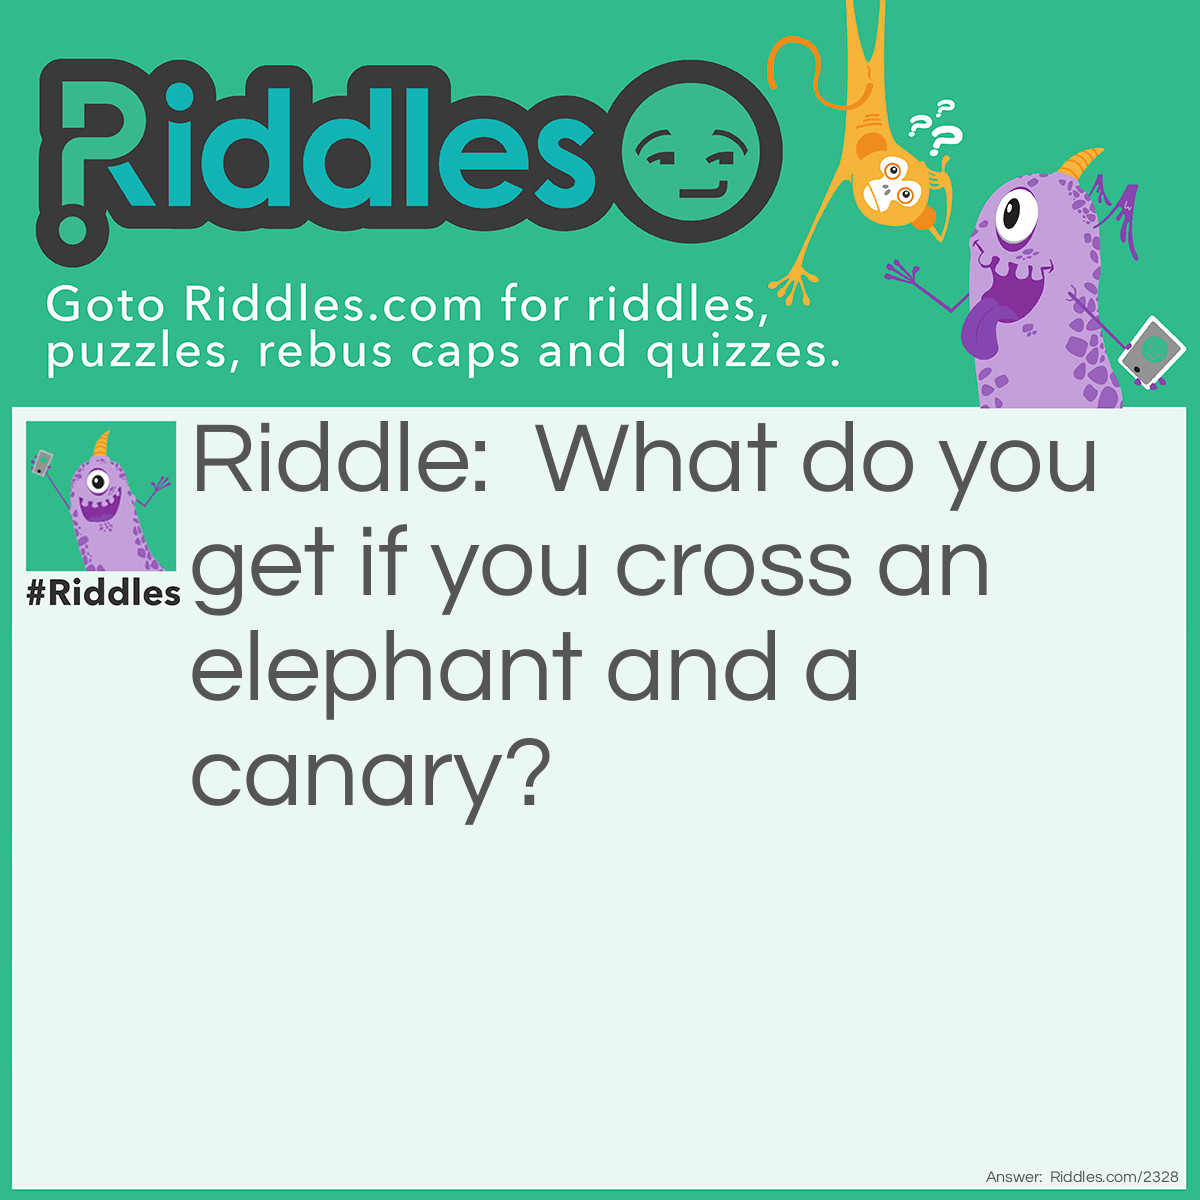 Riddle: What do you get if you cross an elephant and a canary? Answer: A very messy cage.